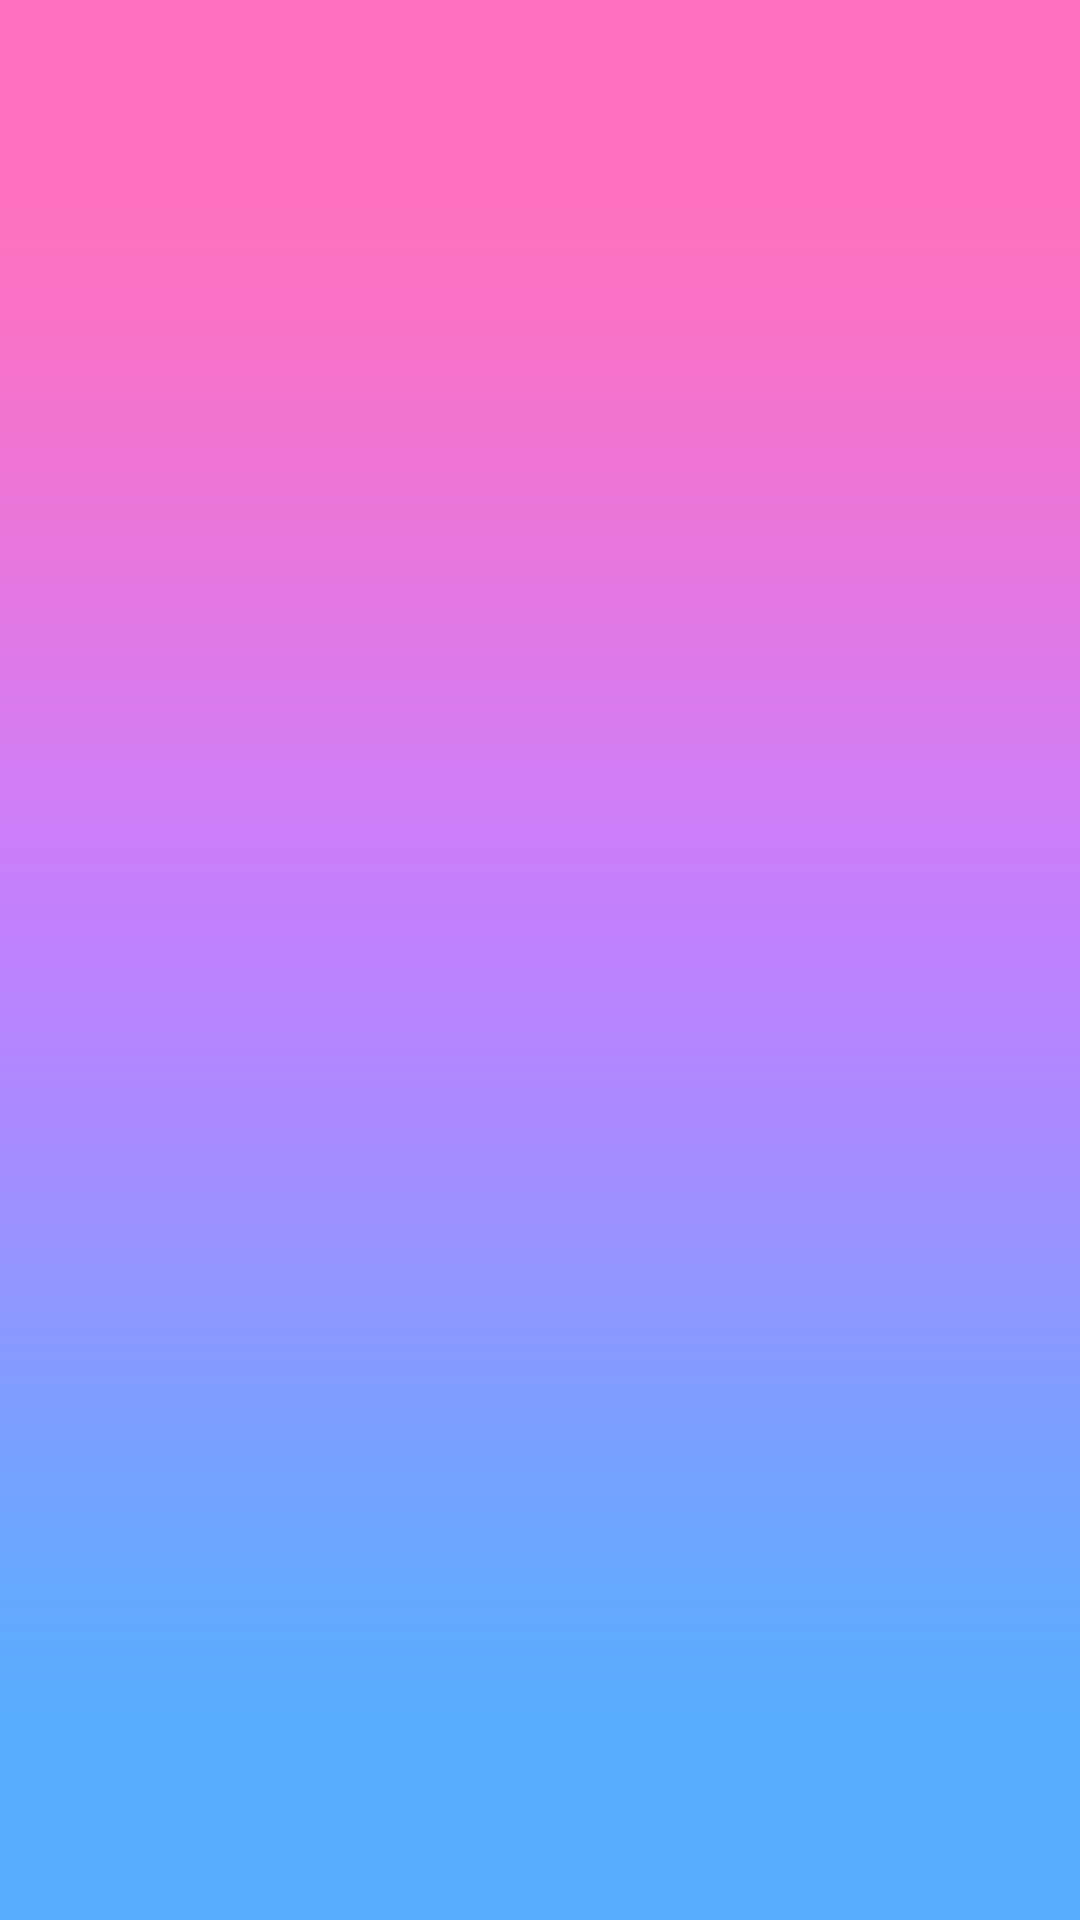 "ethereal Pink And Blue Gradient Background"